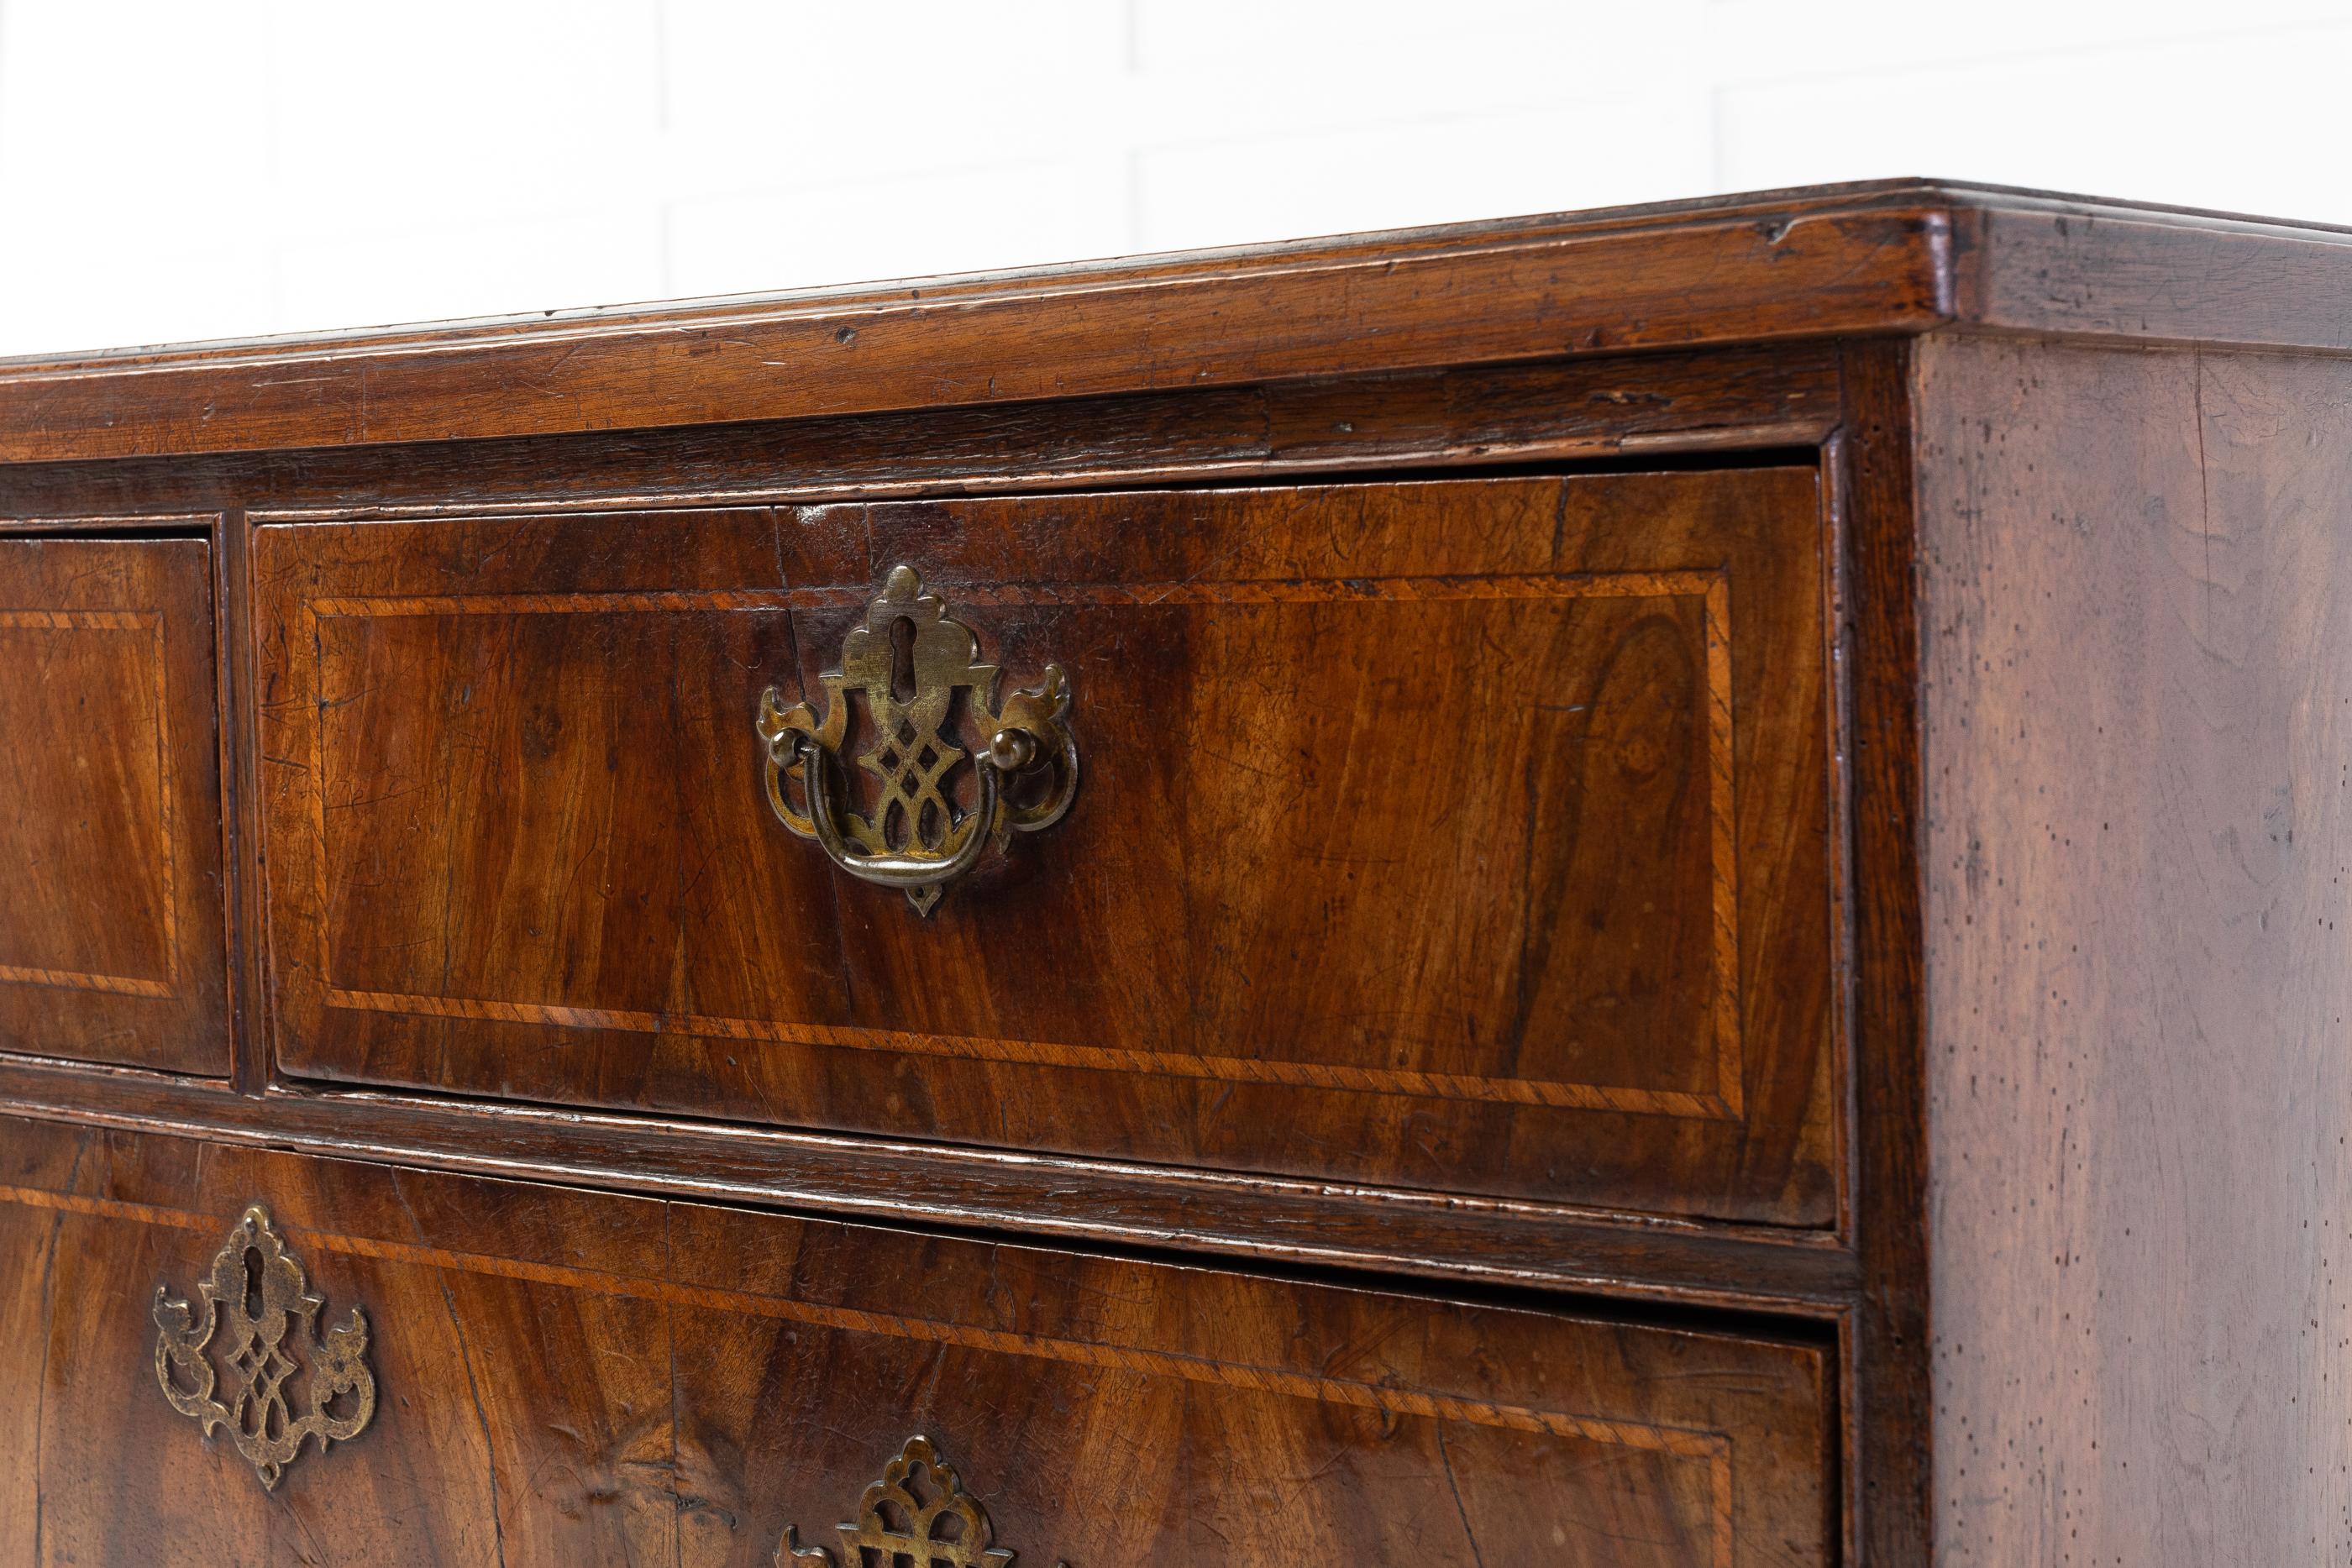 18th century Queen Anne chest of drawers with original handles. The chest has two top drawers over three graduating drawers. The drawers and top have a fine inlay. Standing on bun feet.

A lovely coloured chest of drawers.